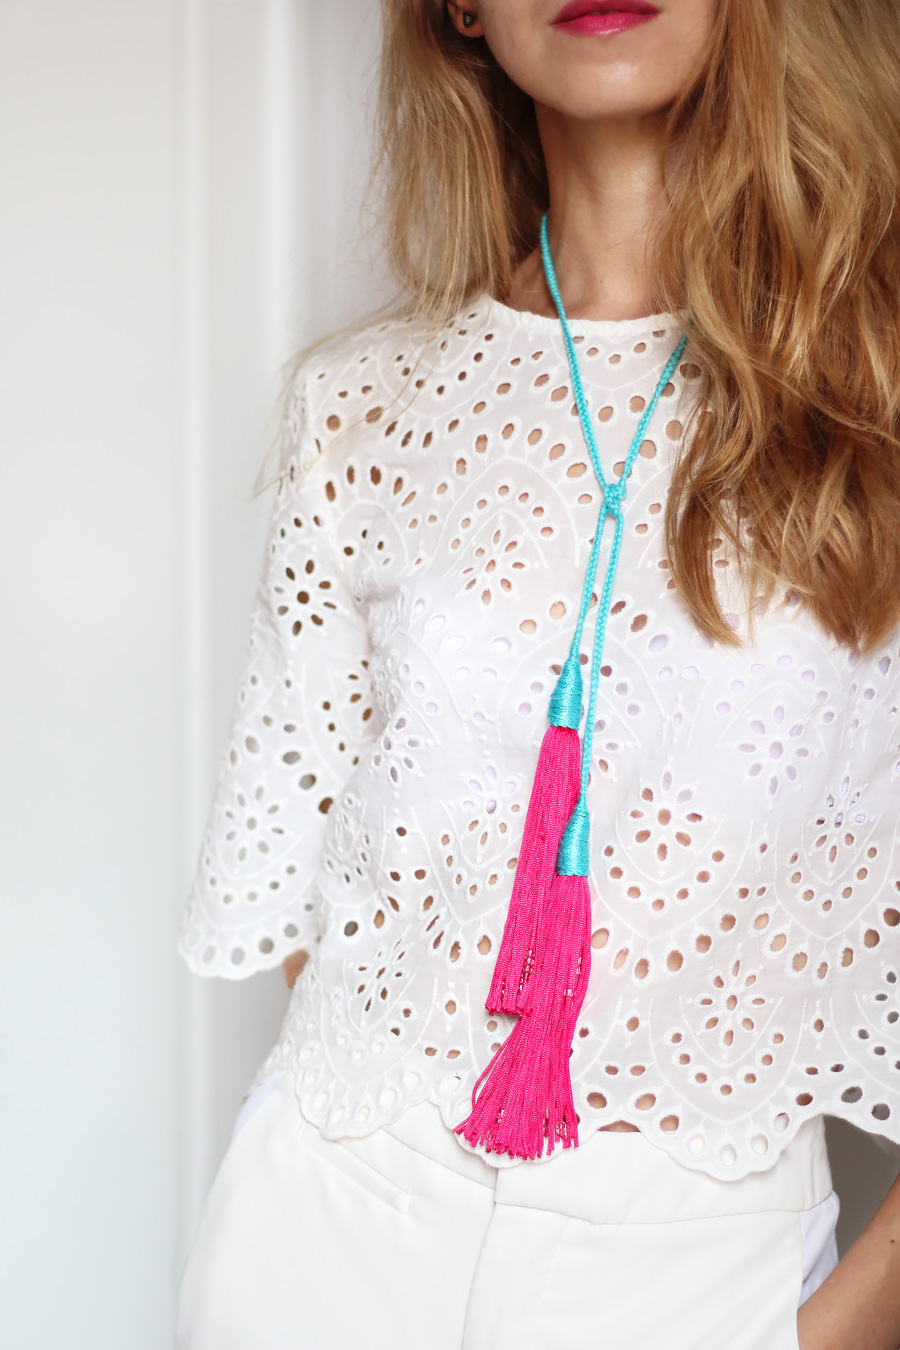 DIY braided tassel necklace tutorial, colorful summer accessories